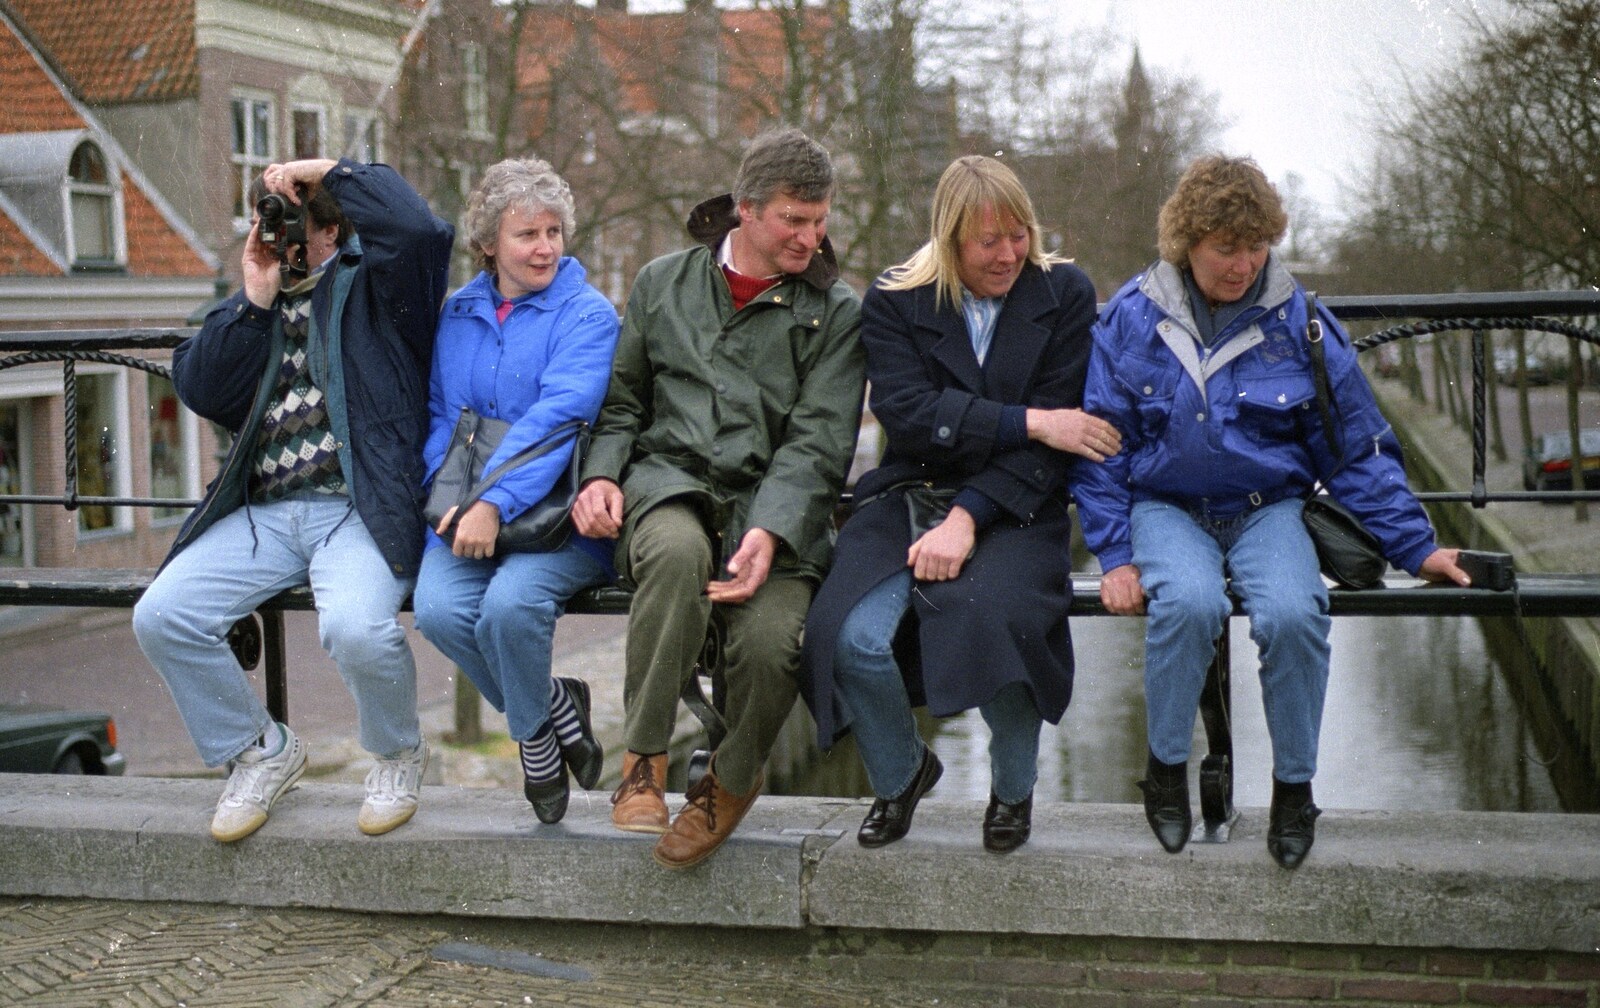 Out and About in Amsterdam, Hoorne, Vollendam and Edam, The Netherlands - 26th March 1992: Corky takes a photo as everyone perches on the railings on a bridge